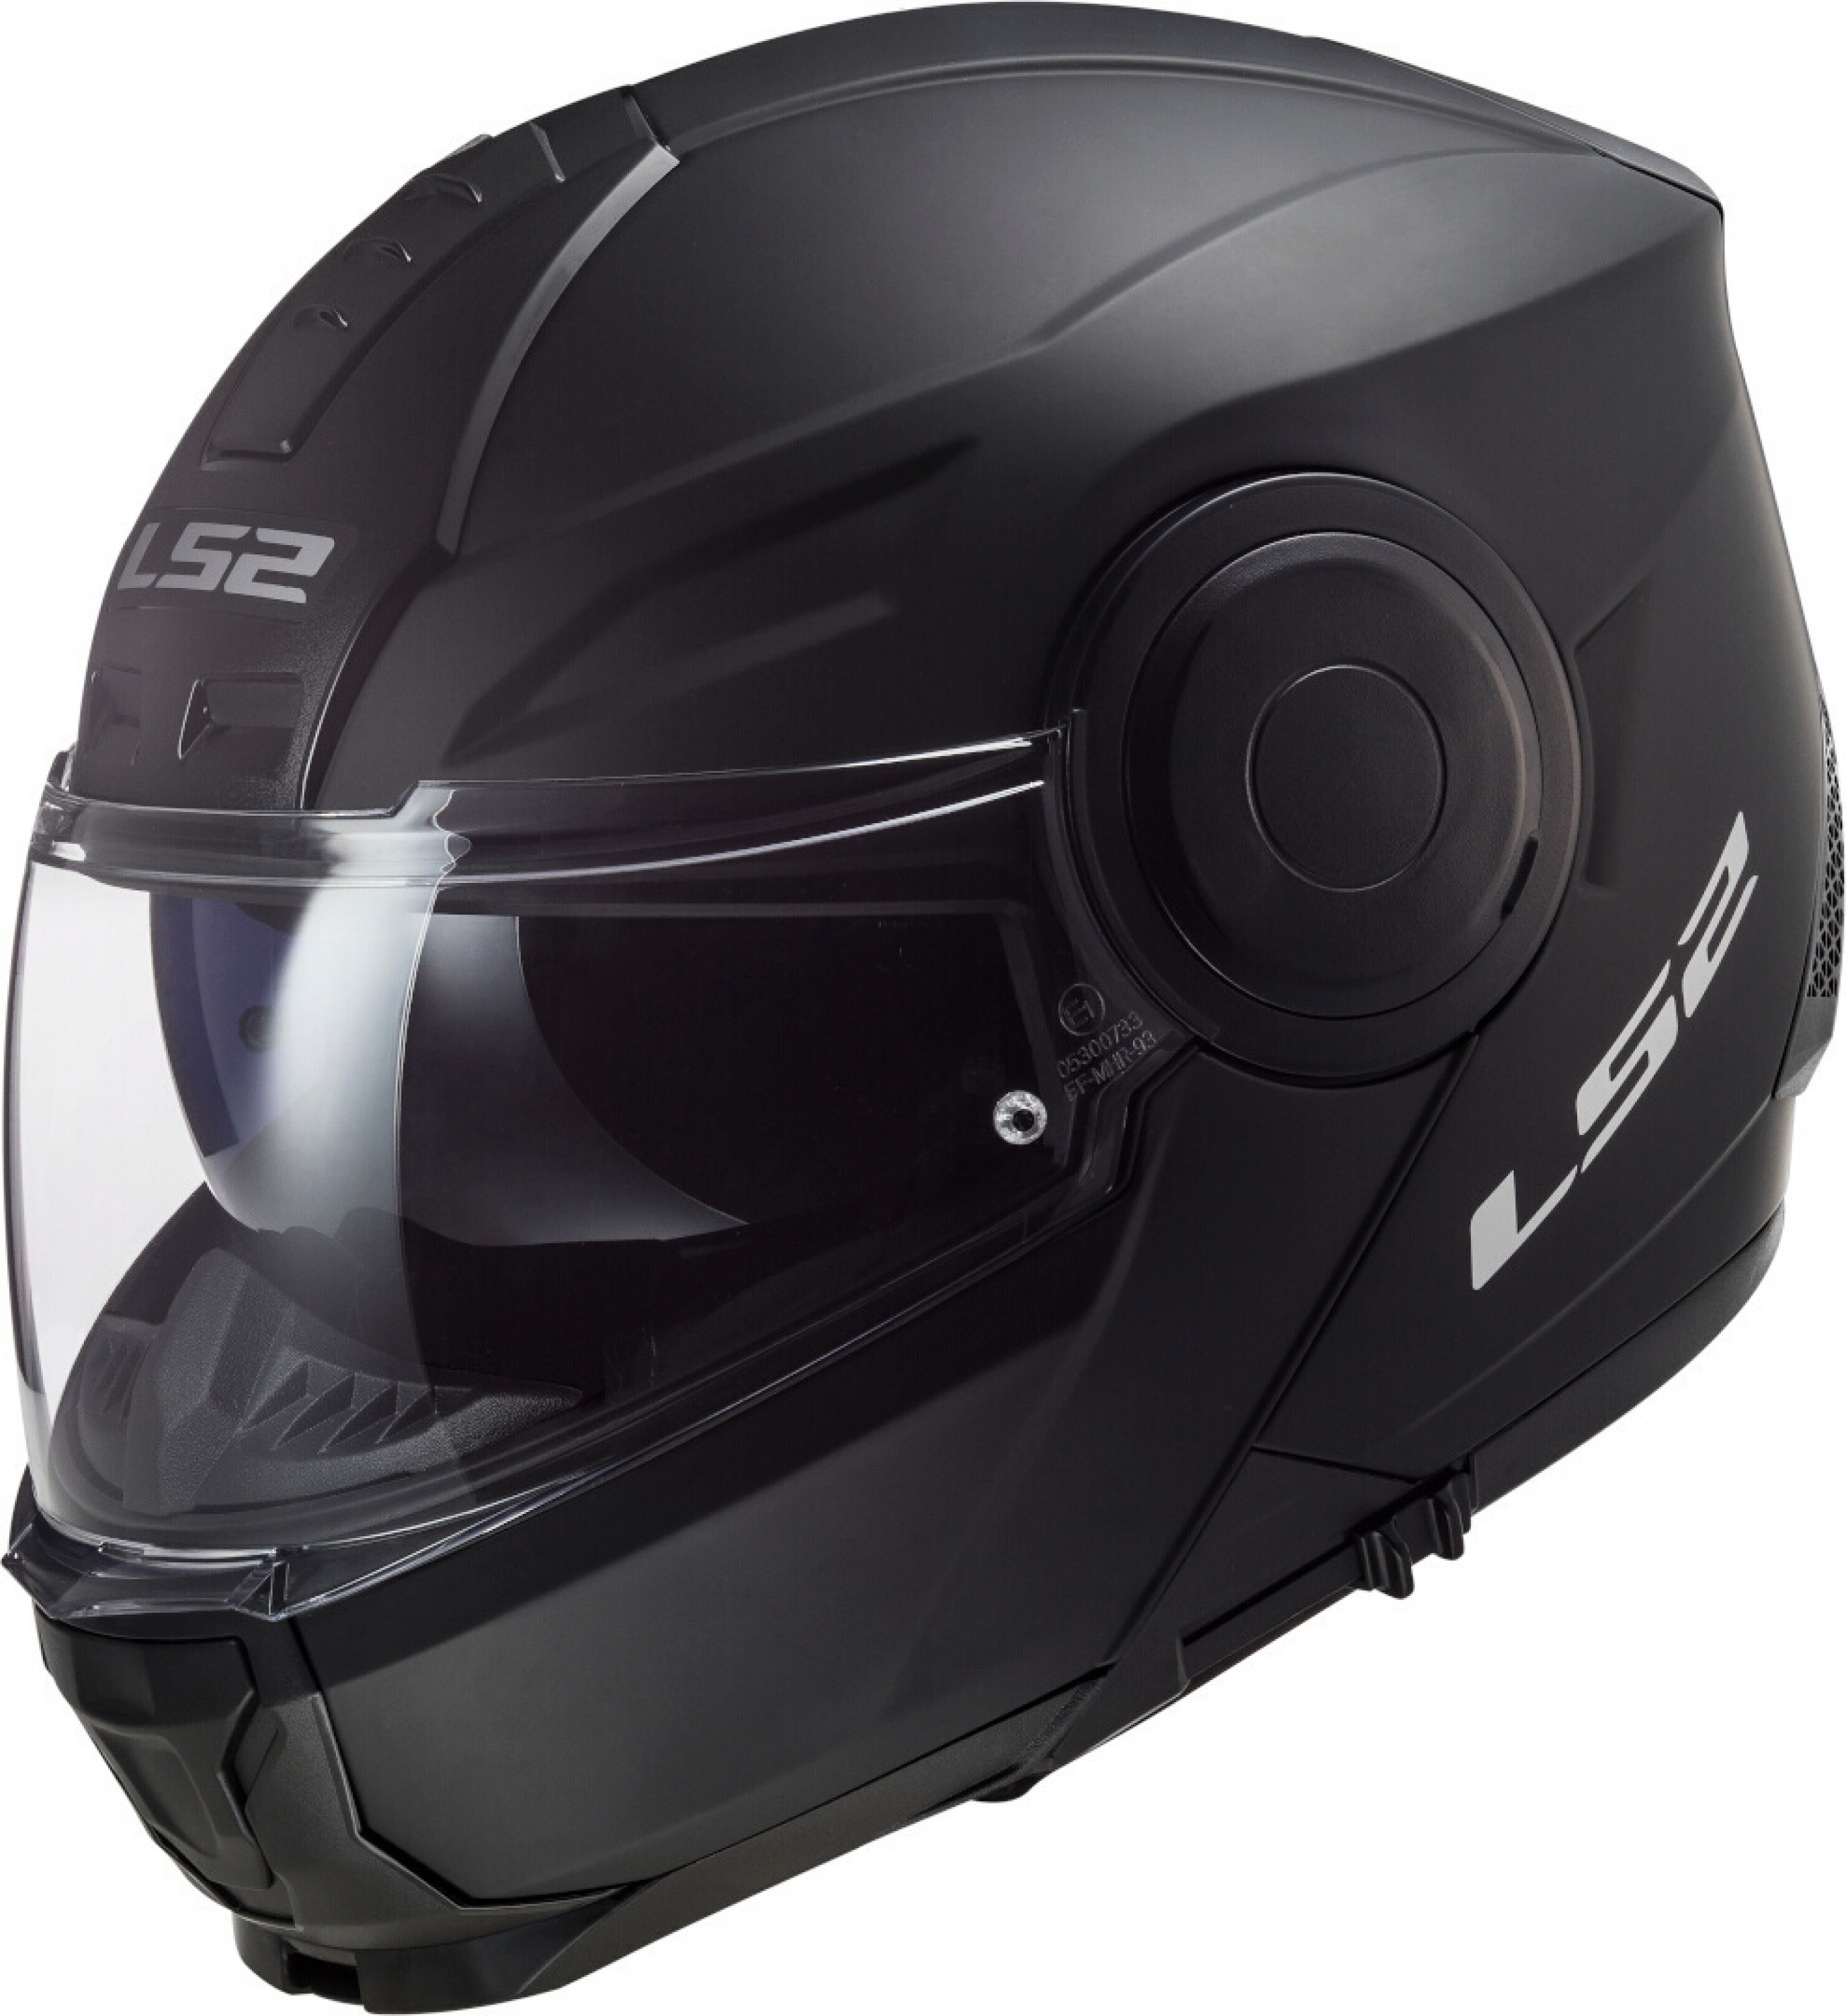 LS2 FF902 Scope "Solid", Helm